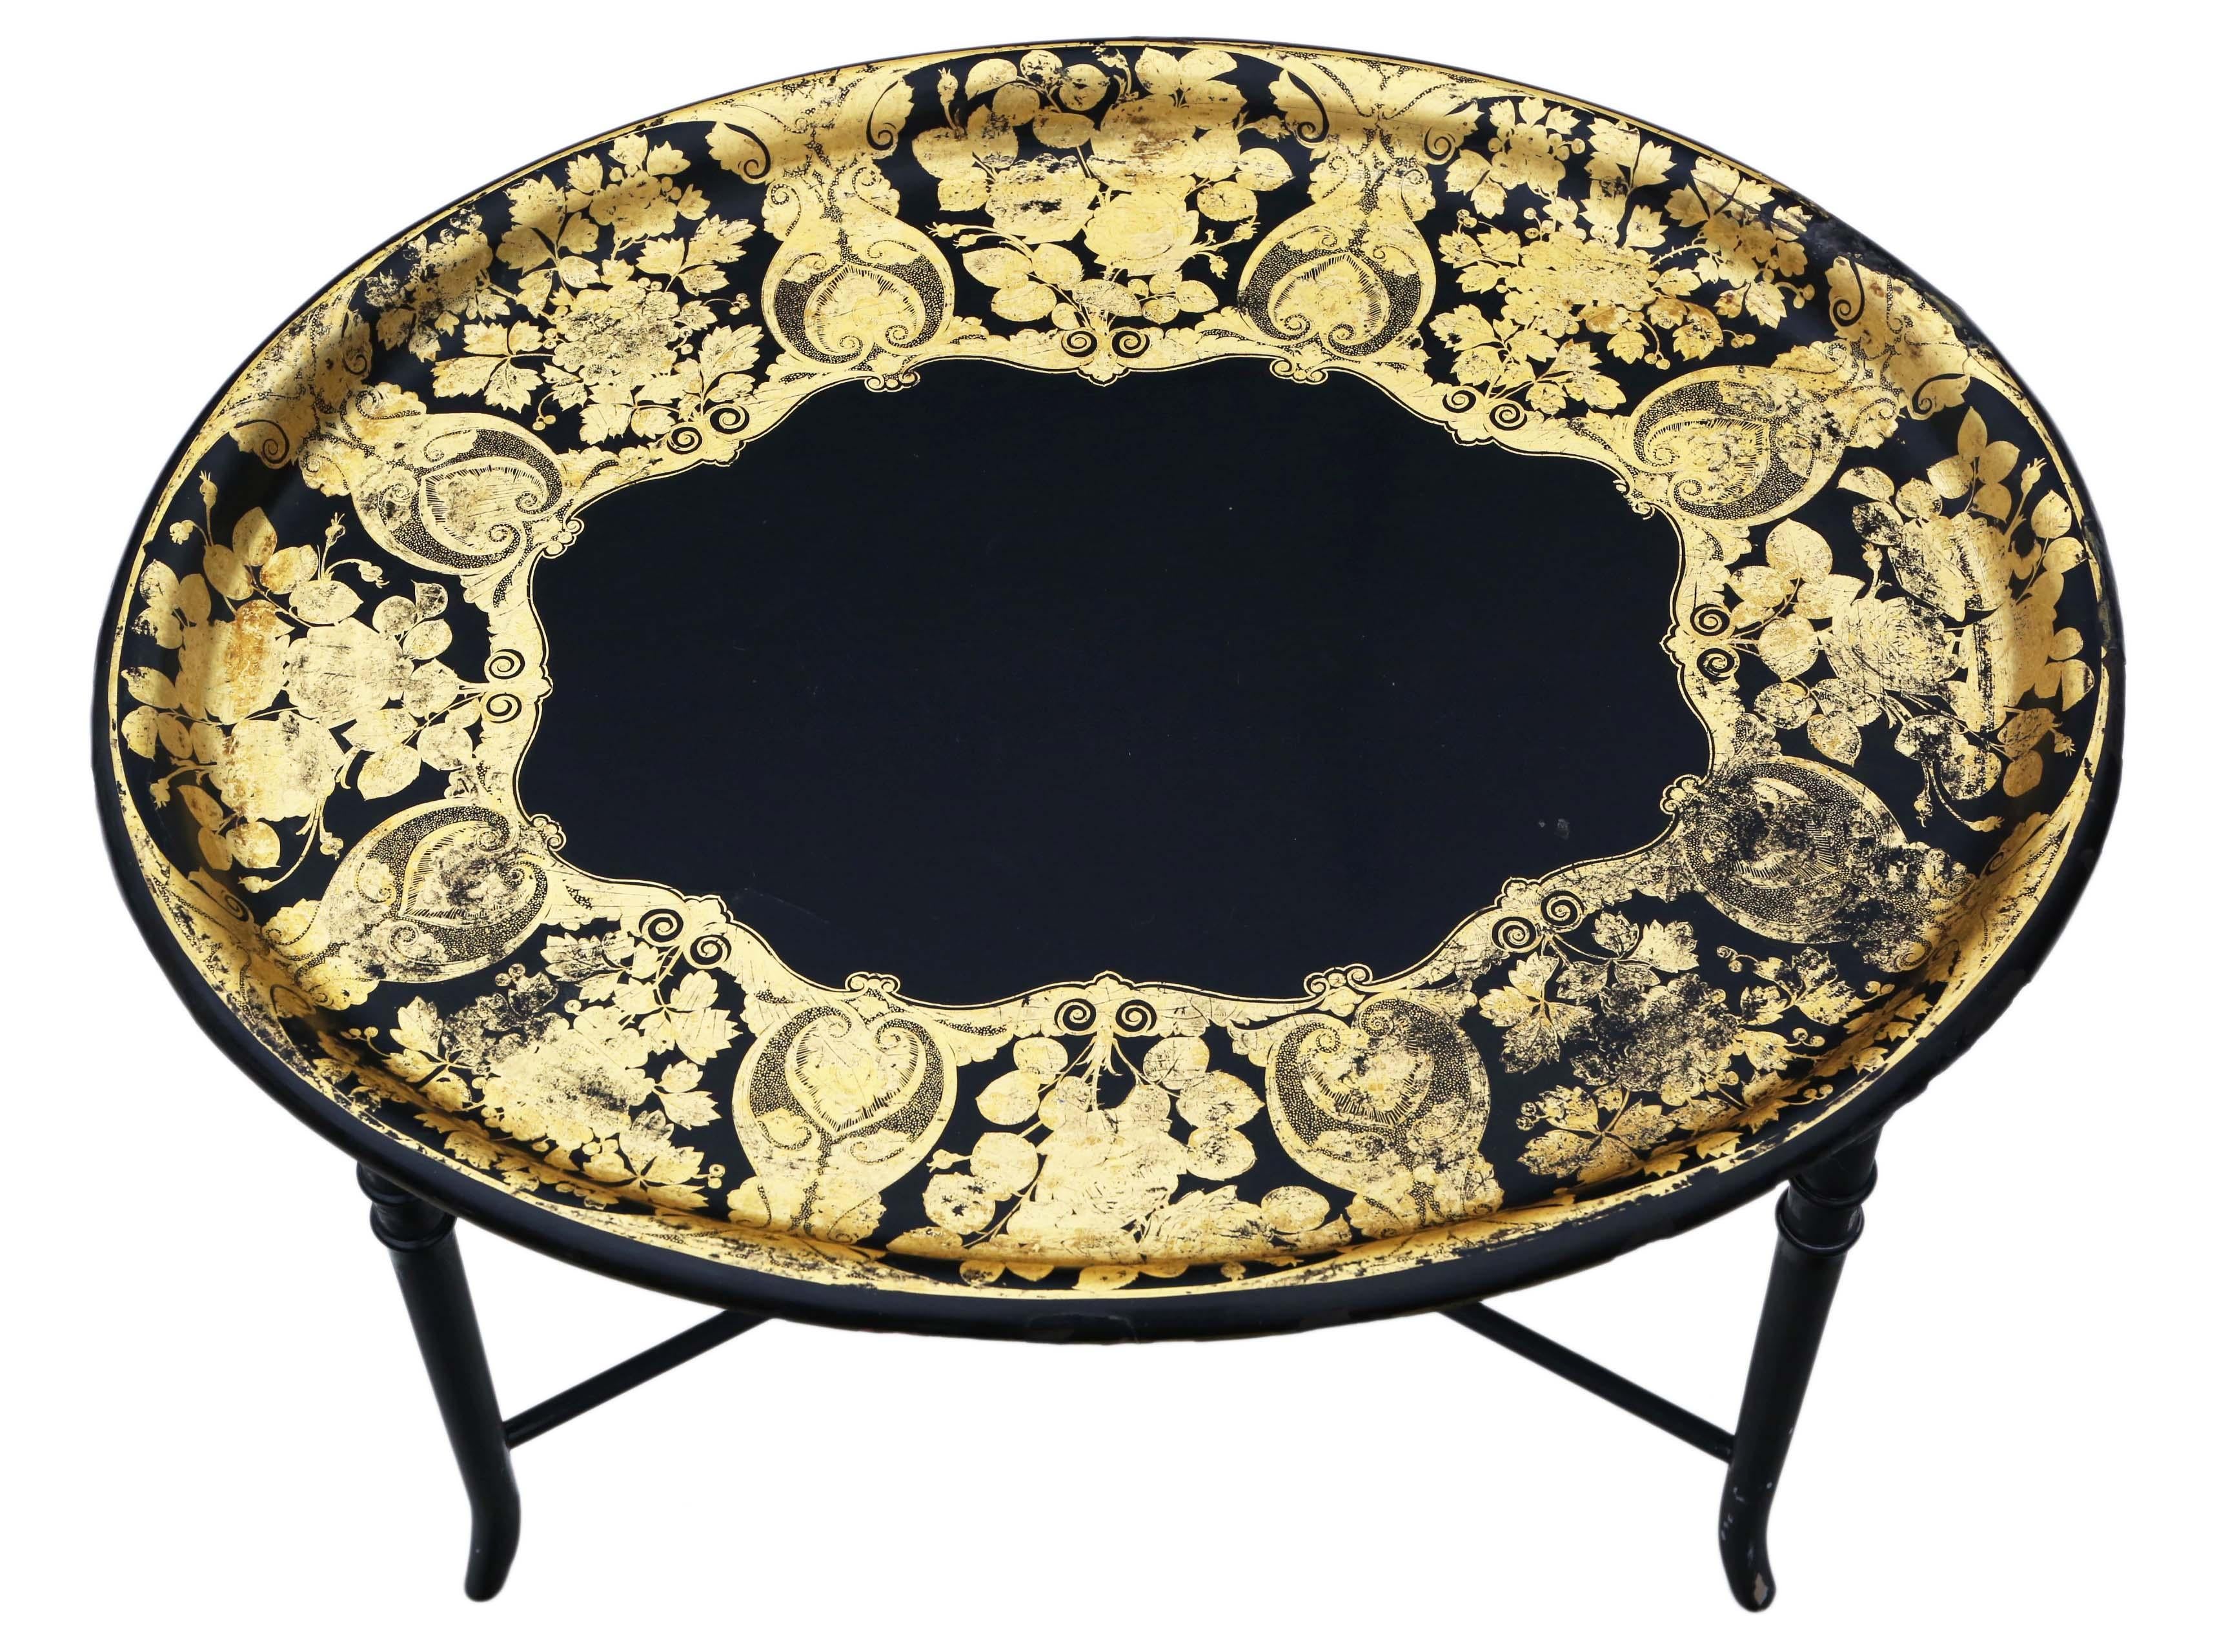 Victorian gilt decorated black lacquer tray on later stand. Dates from circa 1880.
 
Would make a great coffee table. Solid, no loose joints.
A great quality tray.

Very attractive, with lovely proportions and styling. No woodworm.

Lovely